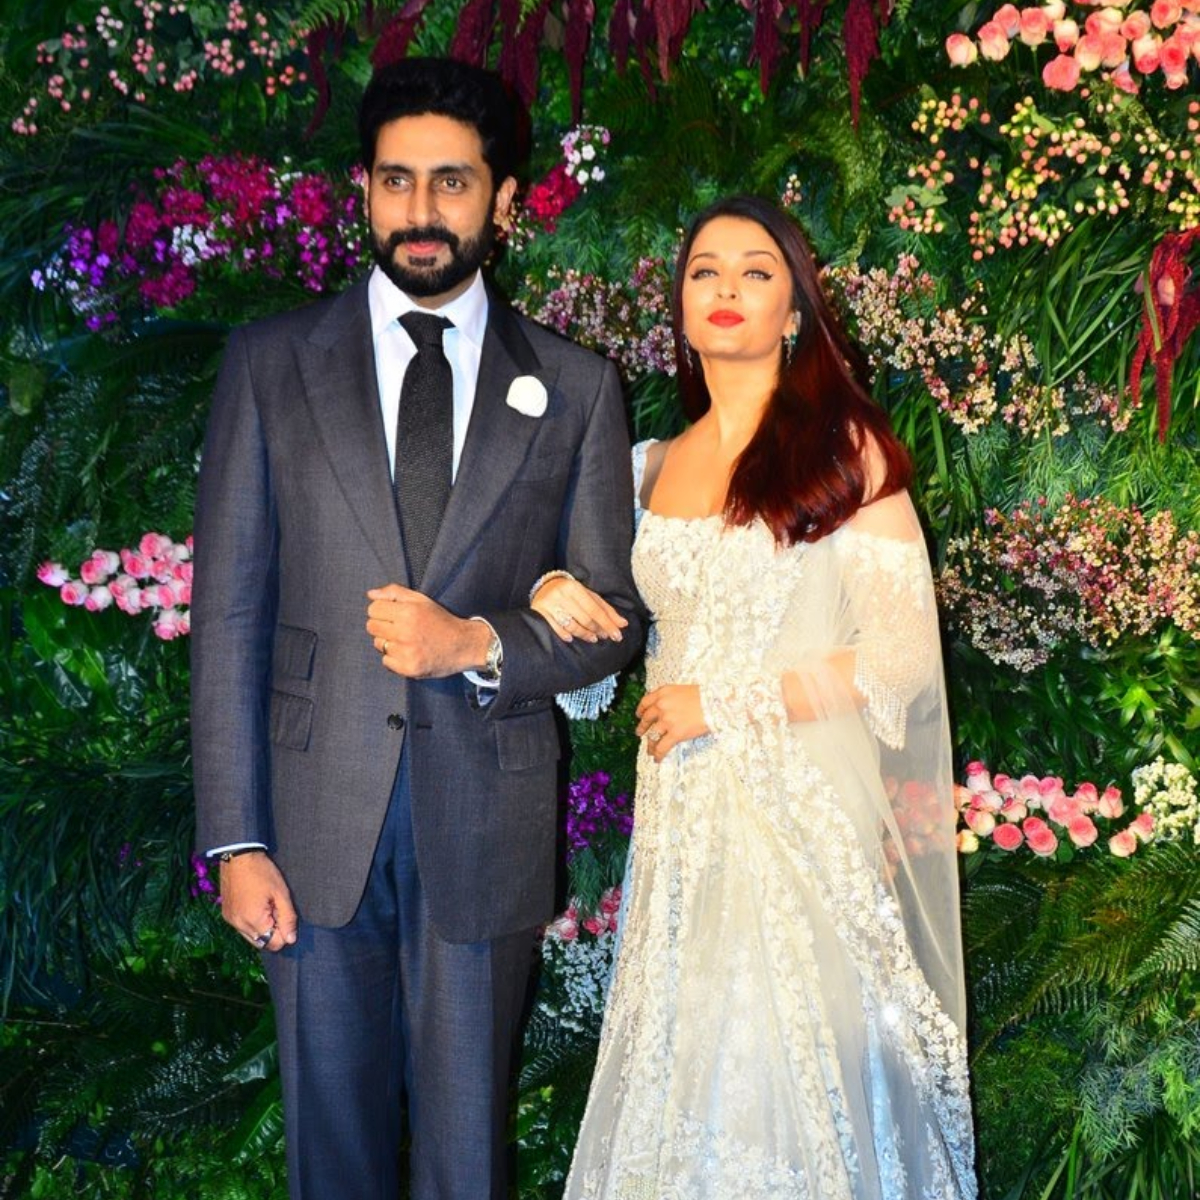 When Aishwarya Rai shared what was special about Abhishek Bachchan: He carries his lineage &amp; upbringing 